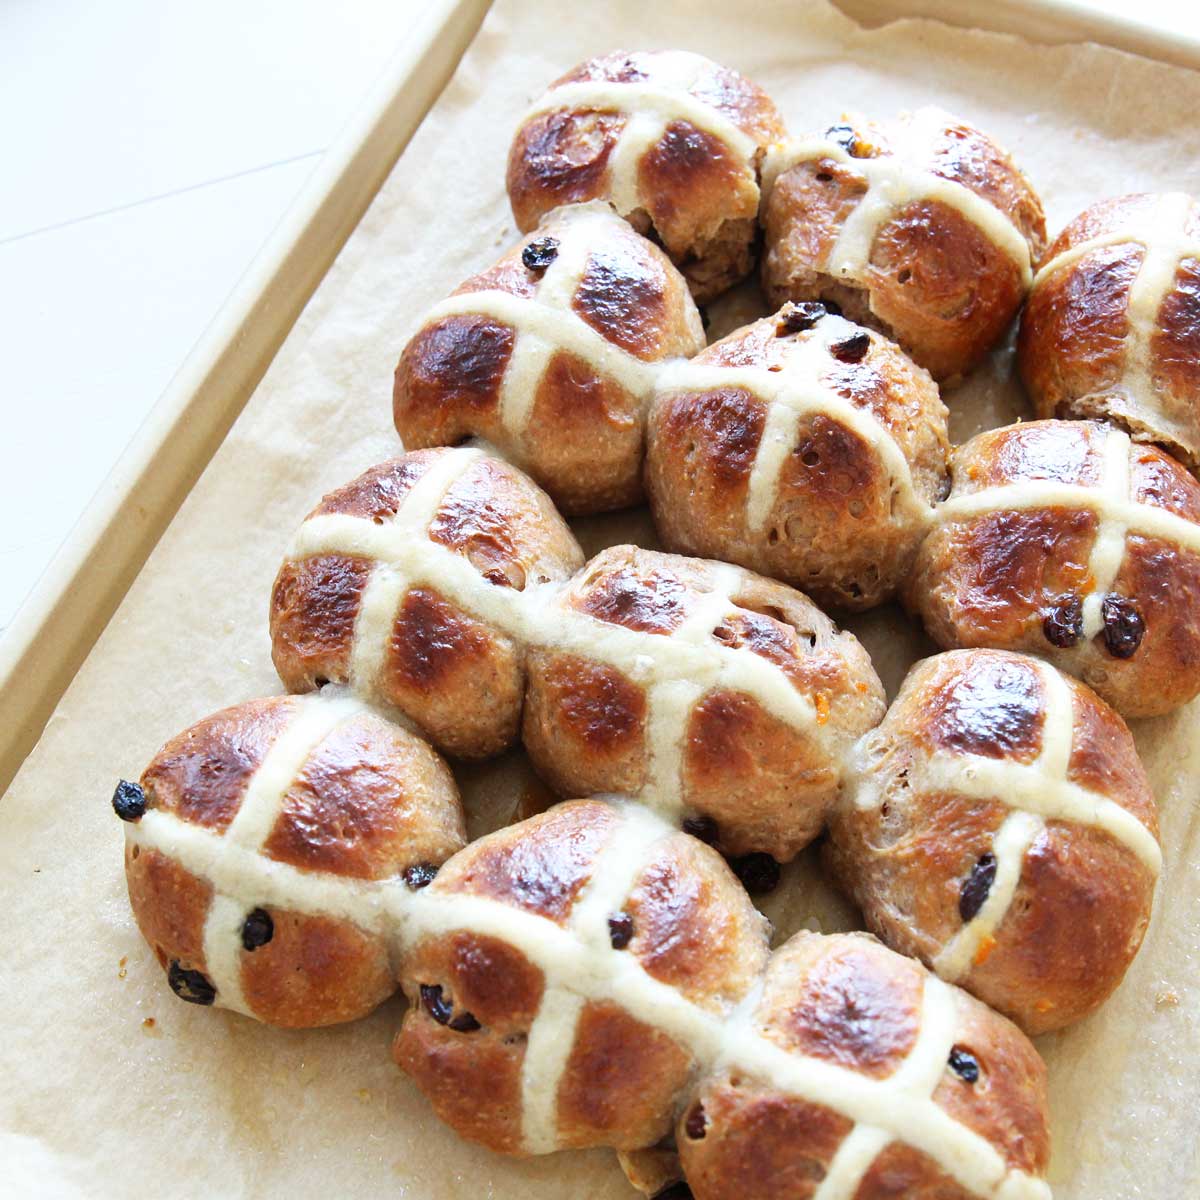 Soft & Fluffy Ricotta Cheese Hot Cross Buns - Perfect for Easter! - Pistachio Nice Cream